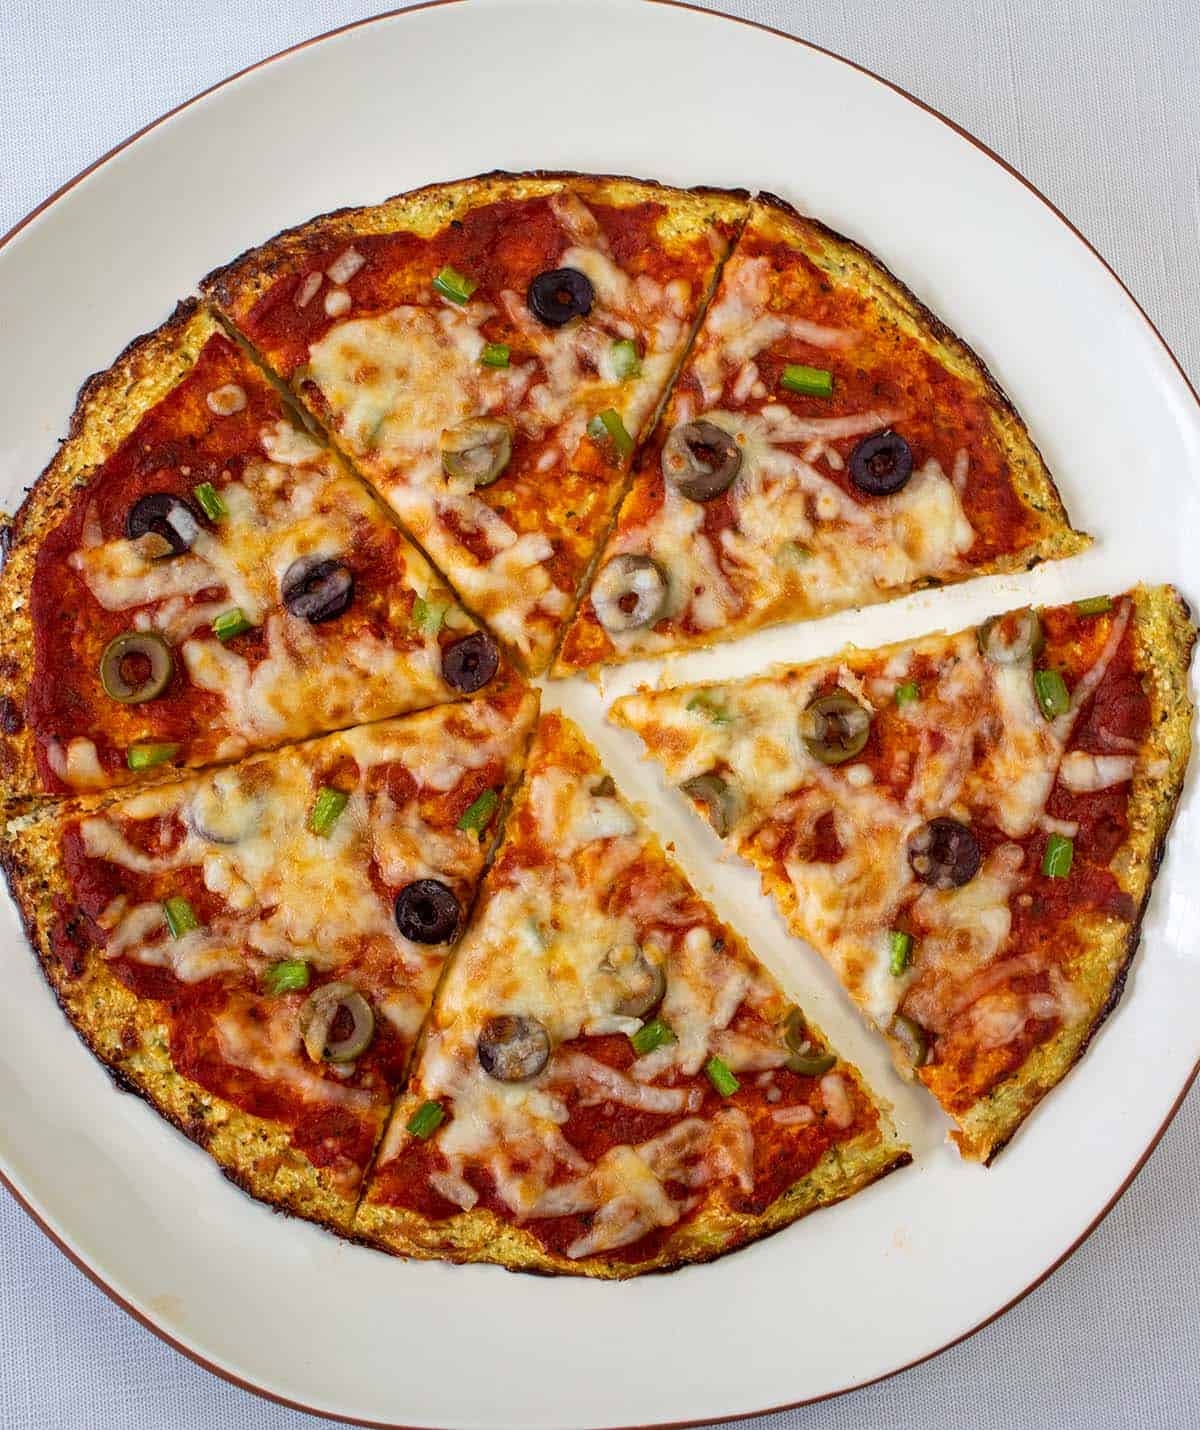 Cauliflower pizza crust that's been topped with tomato sauce, olives, bell peppers and cheese that's been baked and sliced. Pizza is on a white serving plate with brown trim.